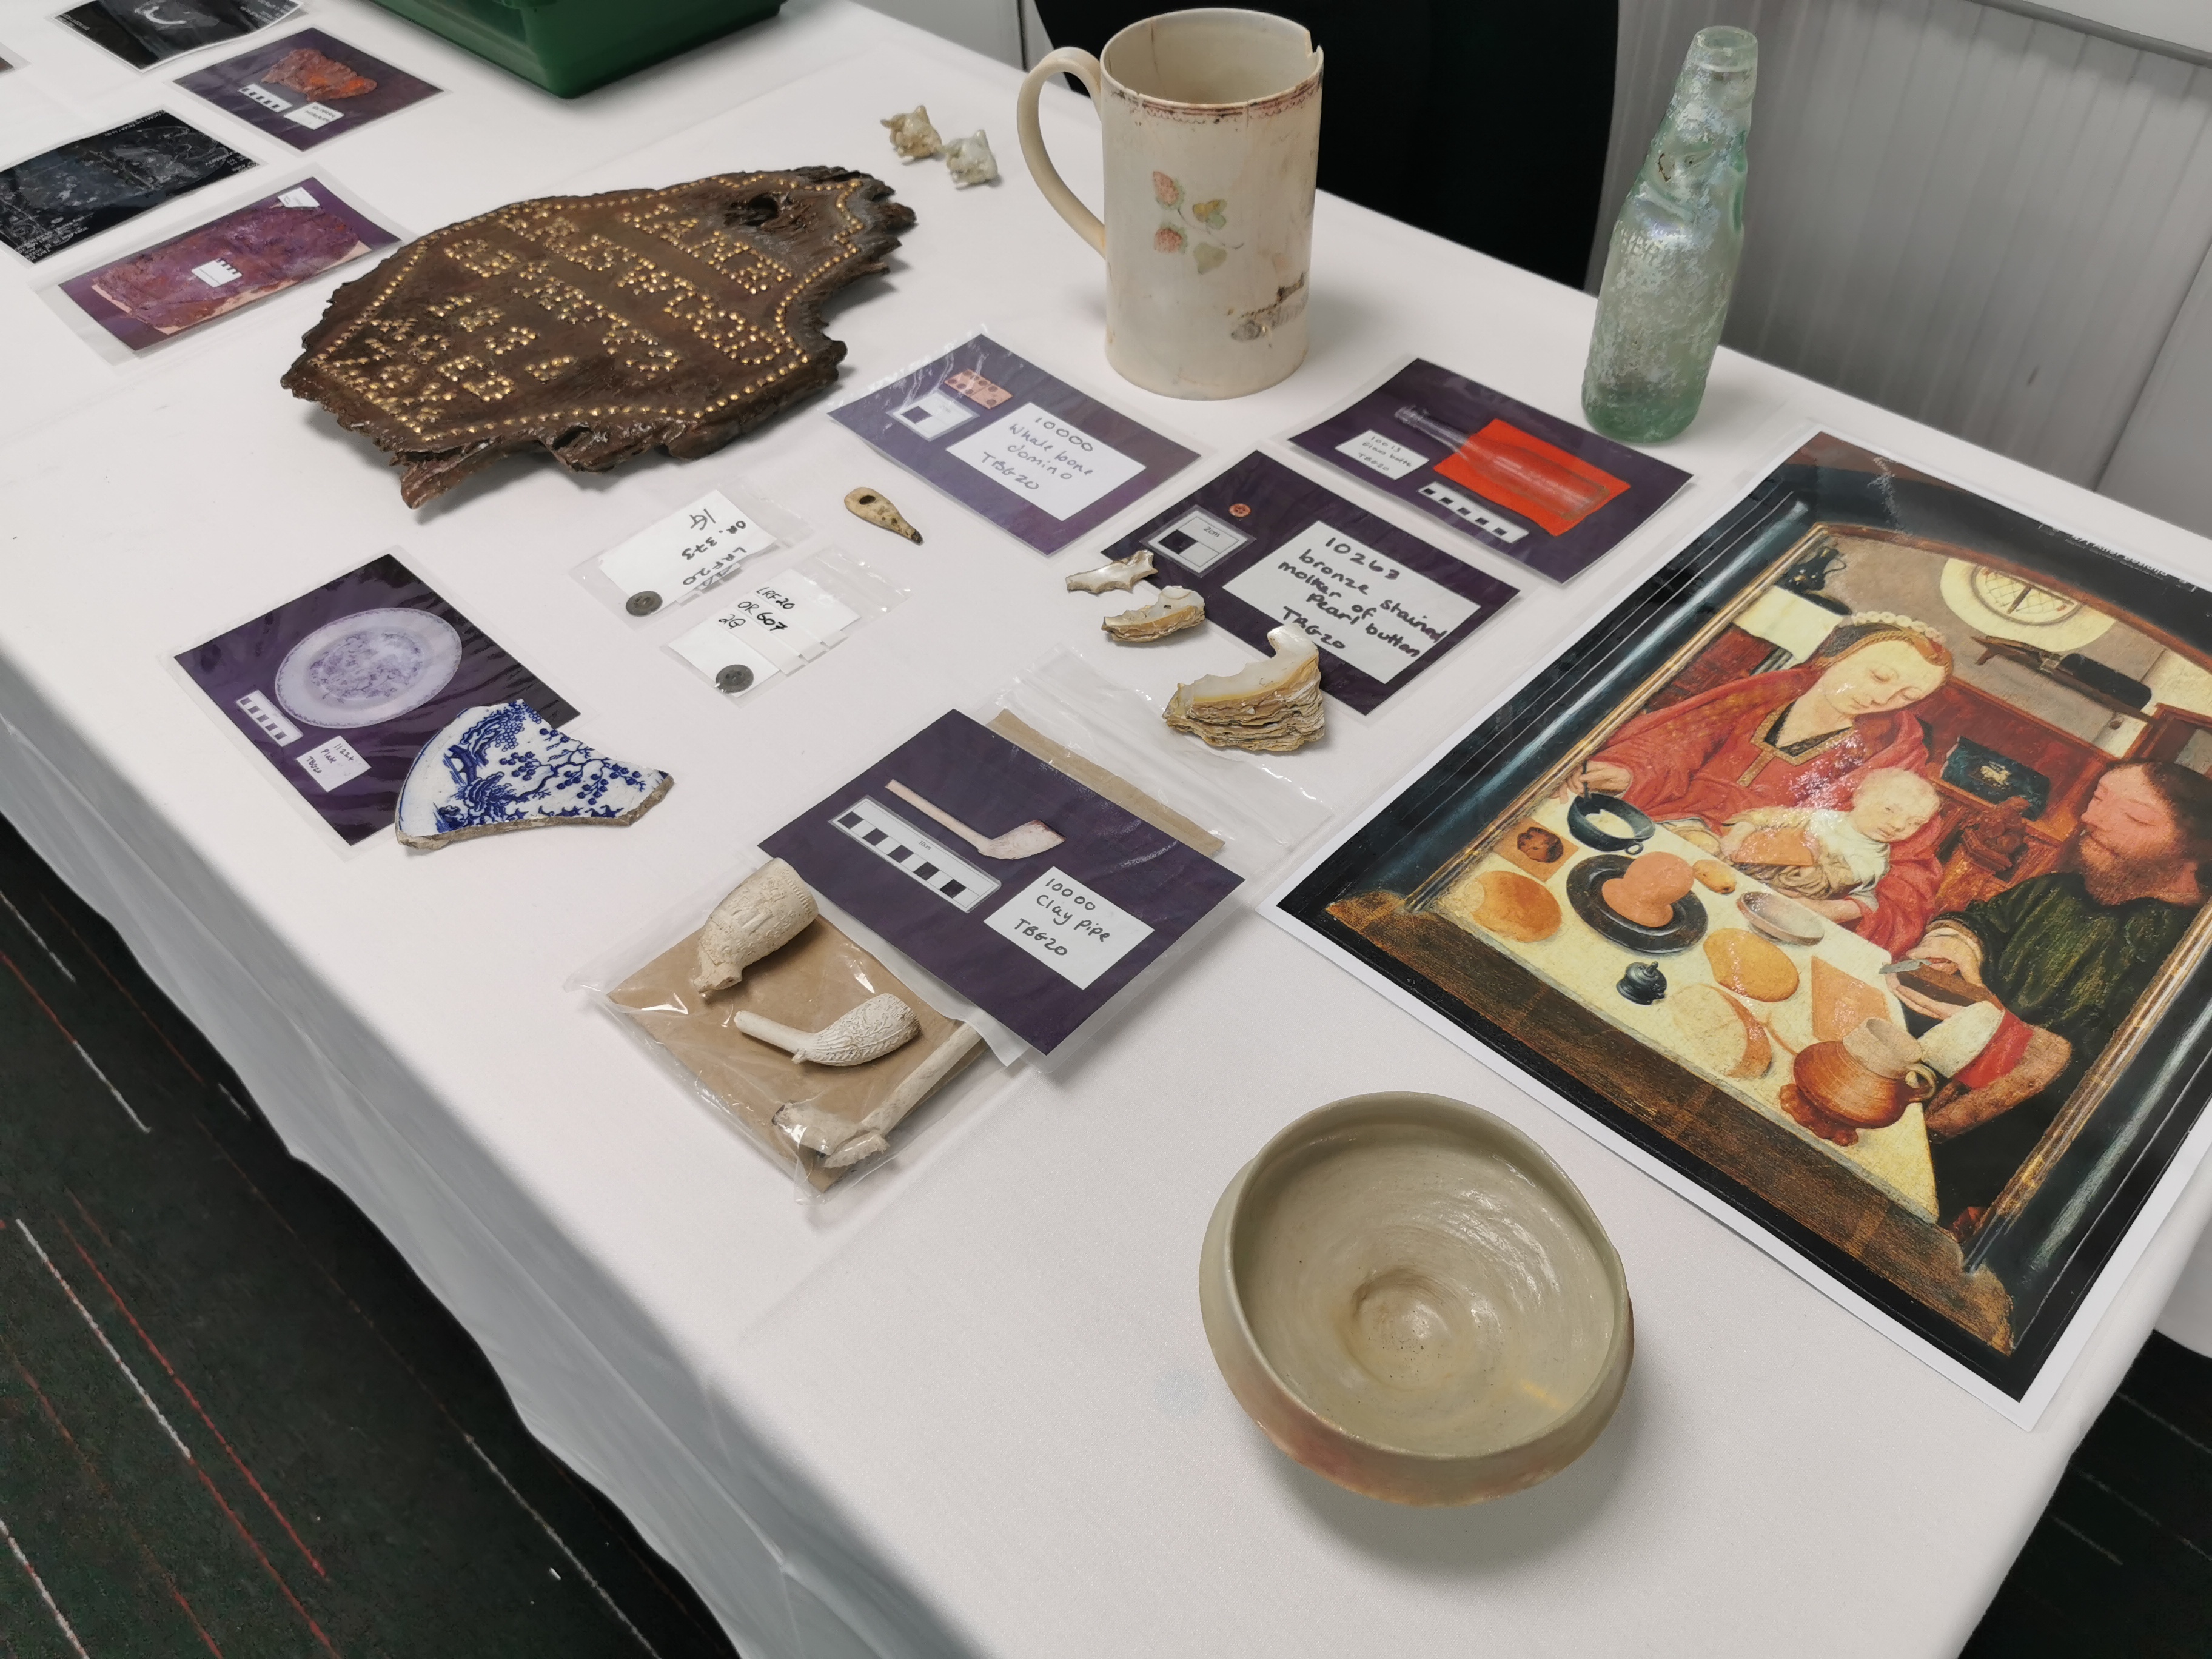 The finds table, showing replicas kindly loaned by Hull Minster, such as the Seigburg bowl, alongside images of finds from Trinity Burial Ground and comparative objects from our handling collection.